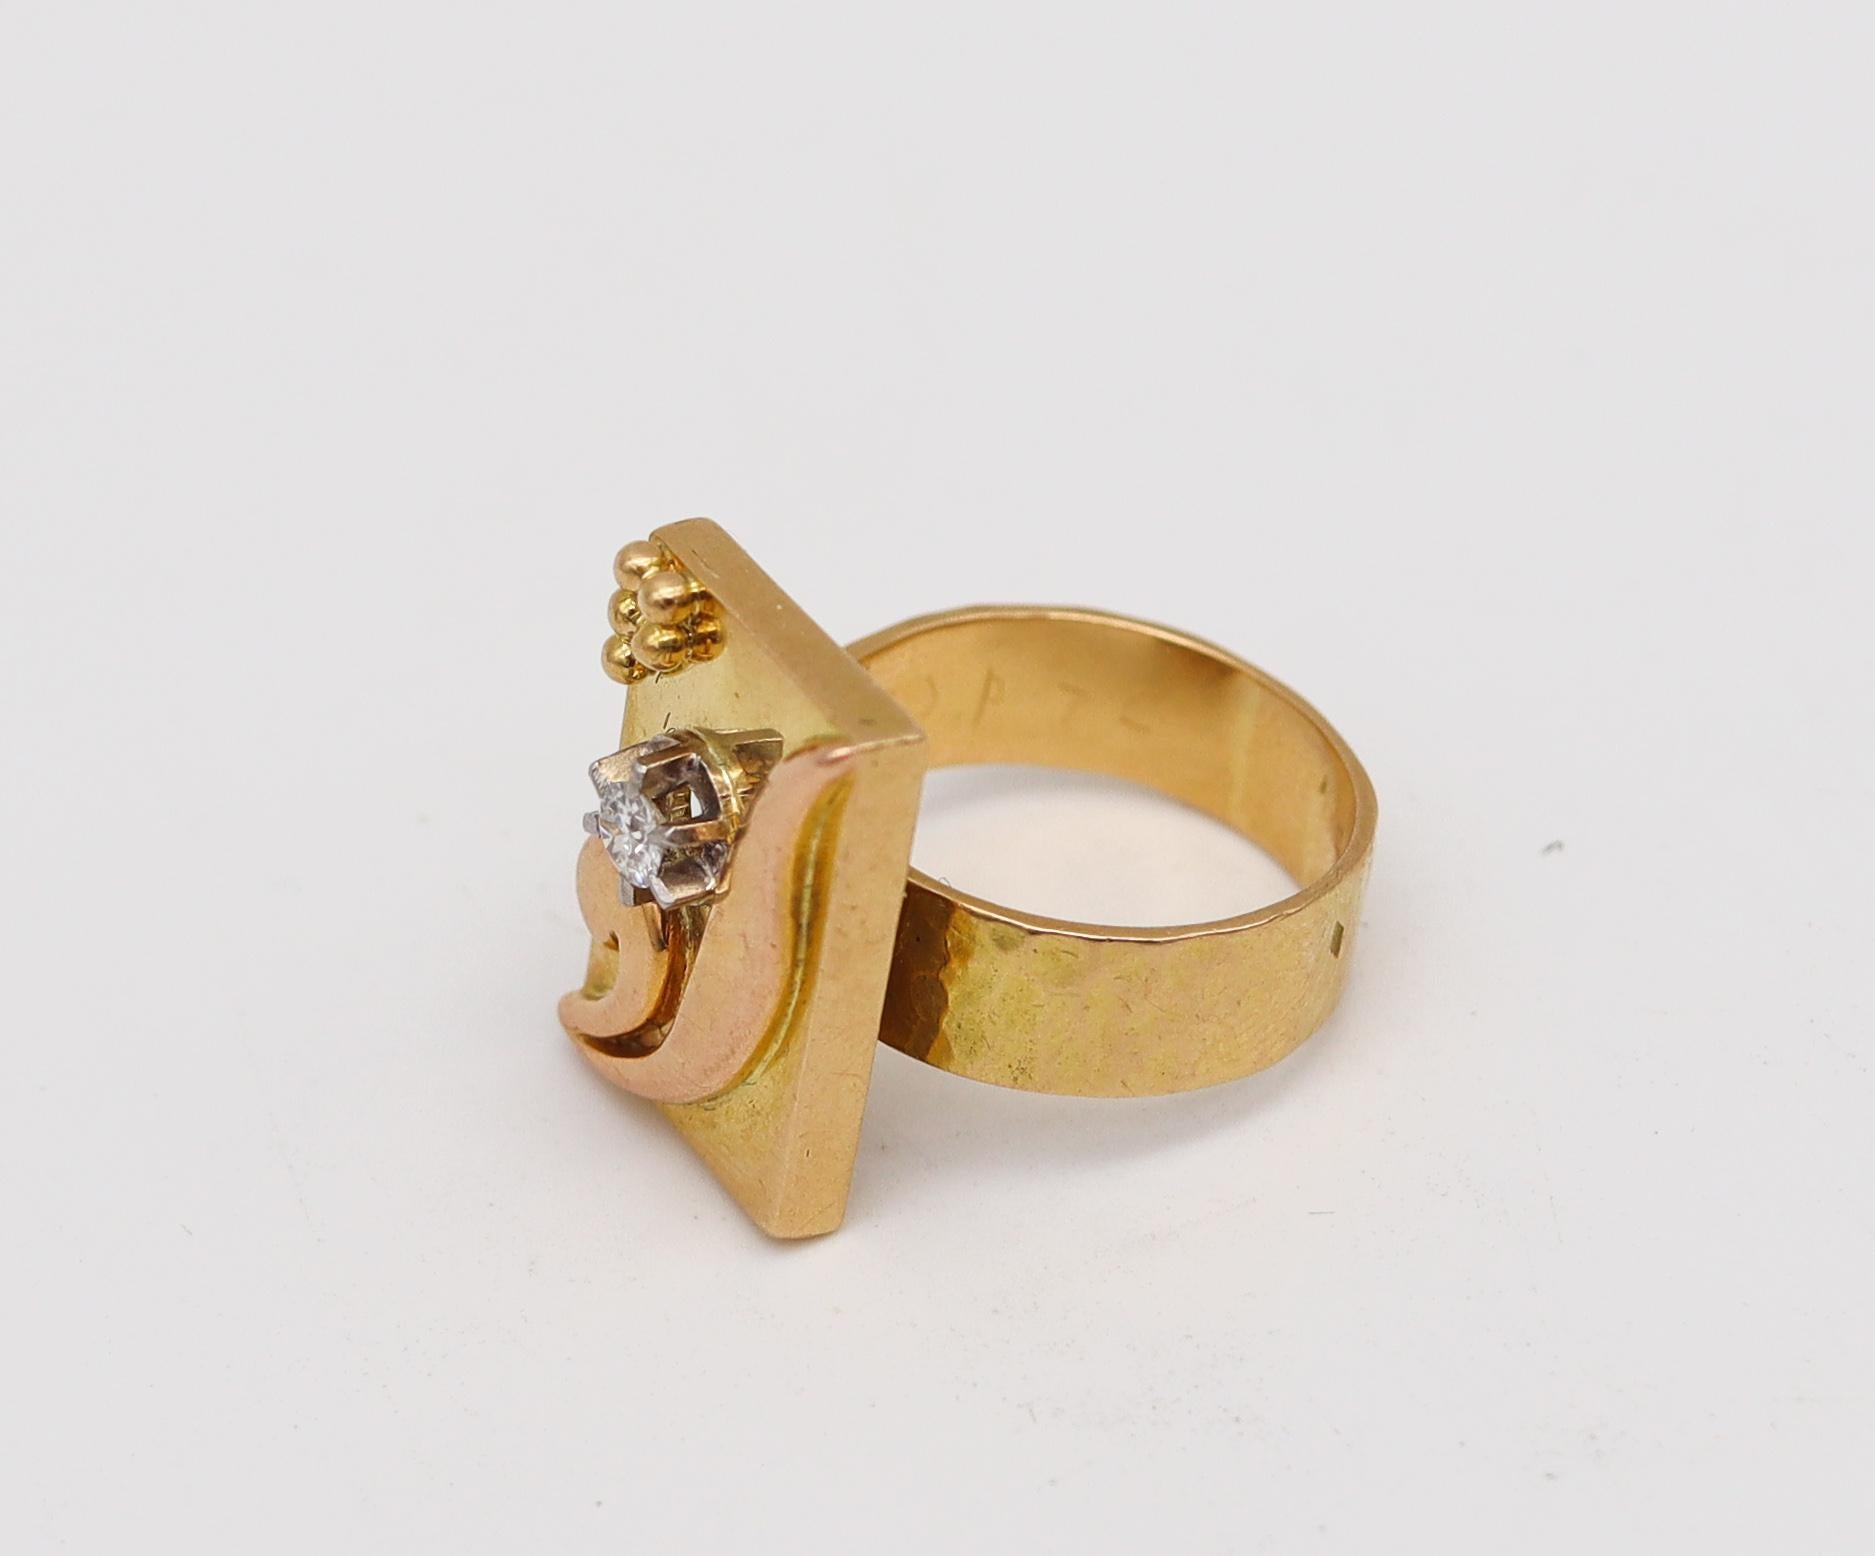 Post-War Jean Després 1950 Paris Artistic Geometric Ring in 18kt Gold with Round Diamond For Sale